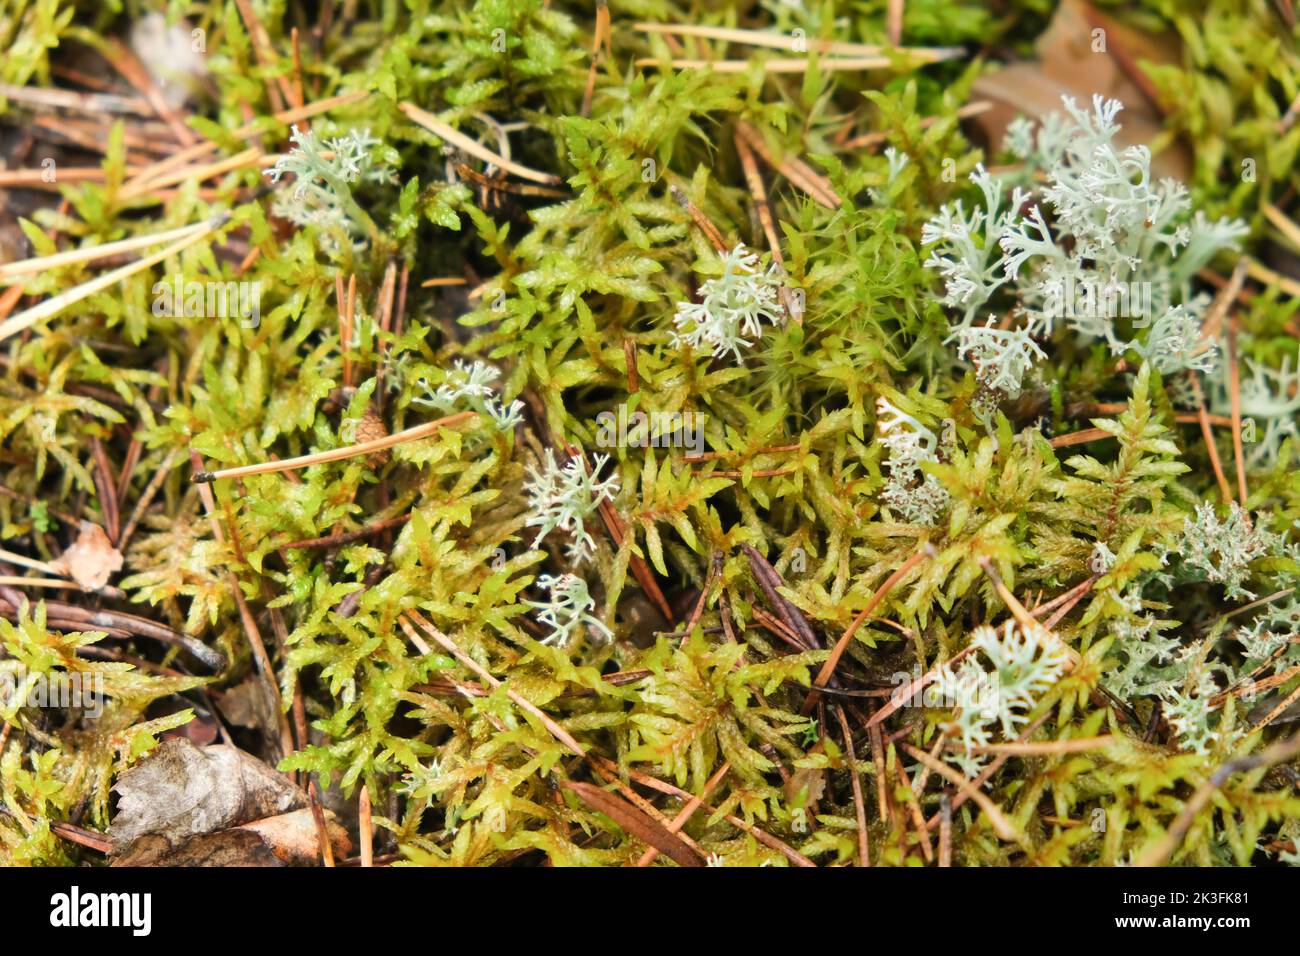 Polytrichum growing in the forest. Polytrichum growing among moss. Polytrichum close-up. Stock Photo